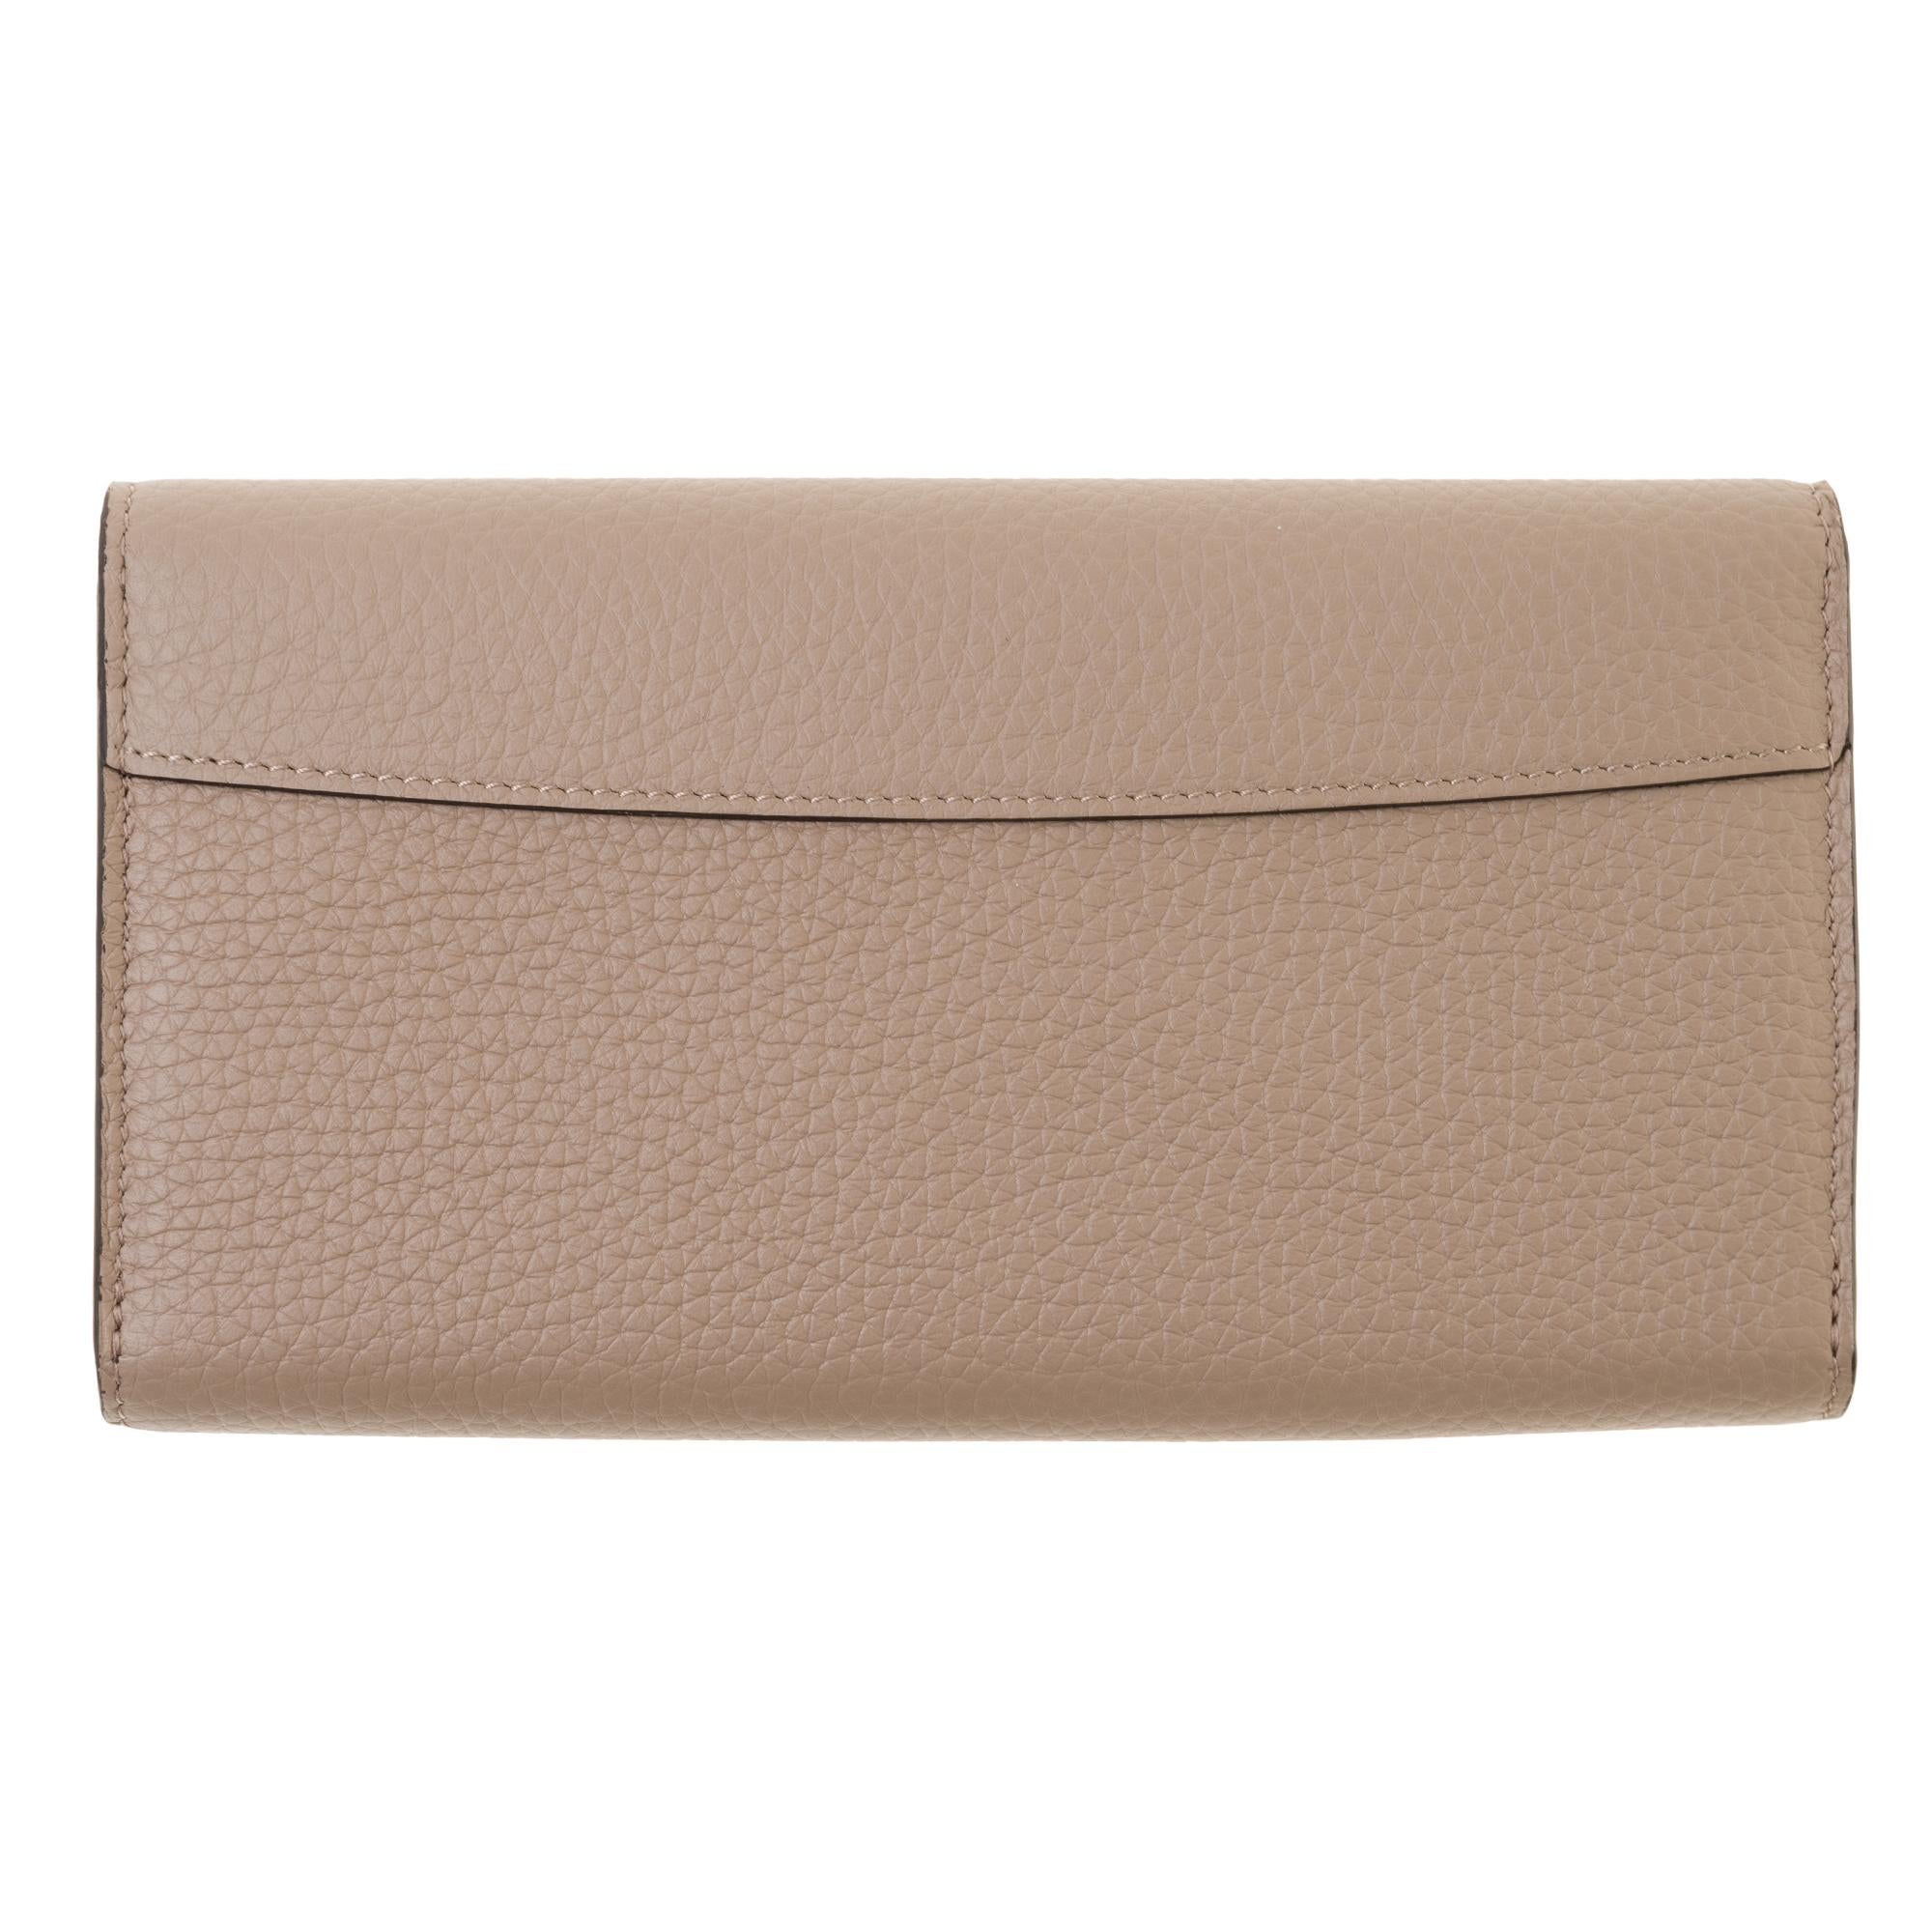 Crafted from soft Taurillon leather with LV initials, this elegant wallet is inspired by the iconic Capucine bag. As refined as it is functional, it is spacious enough to contain all your everyday essentials.
Details
20.0 x 11.0 x 2.5 cm
(Length x